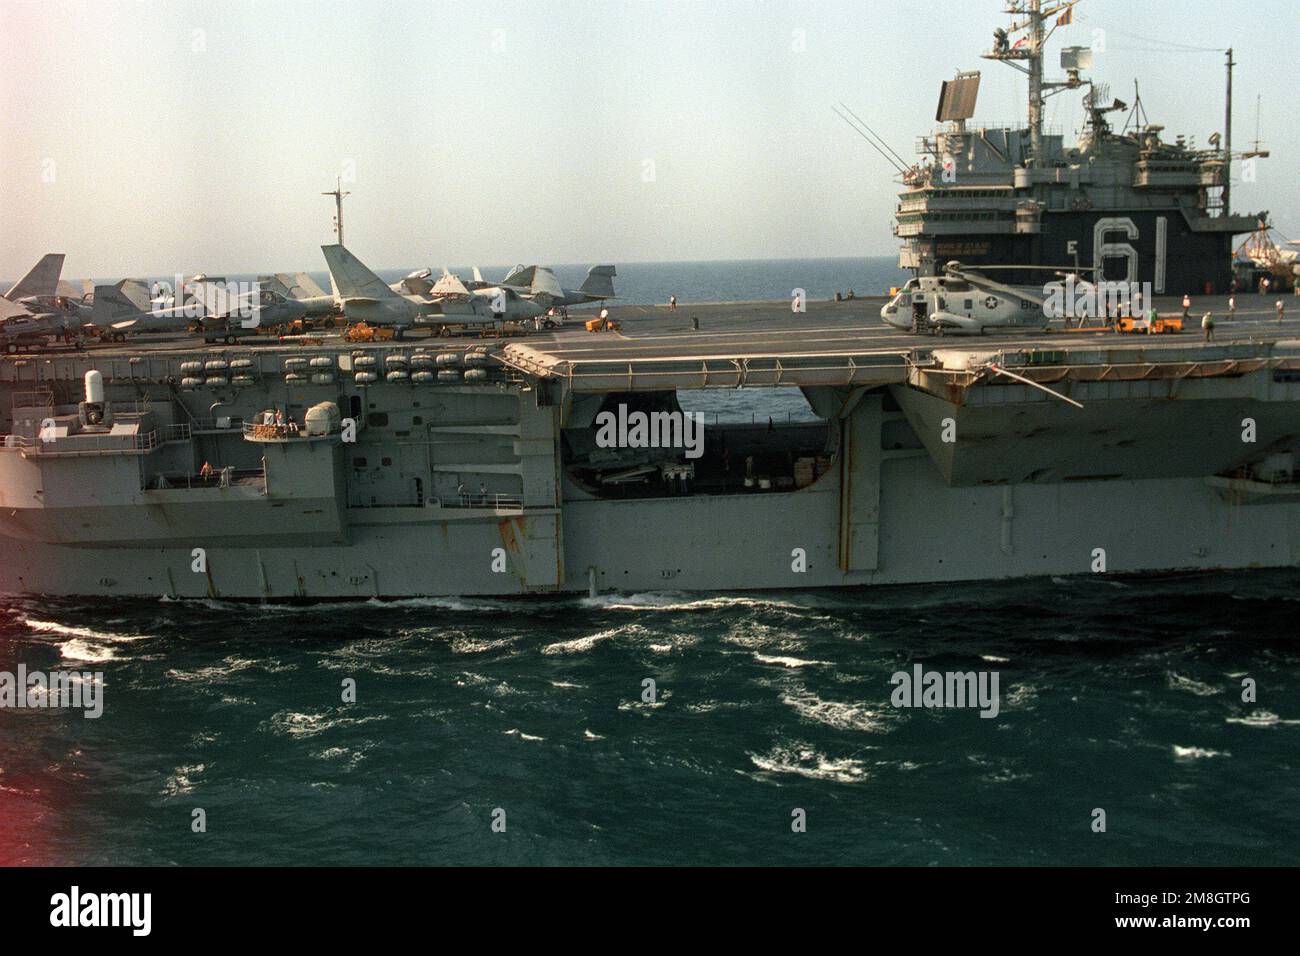 Uss ranger cv 61 underway sea hi-res stock photography and images - Alamy